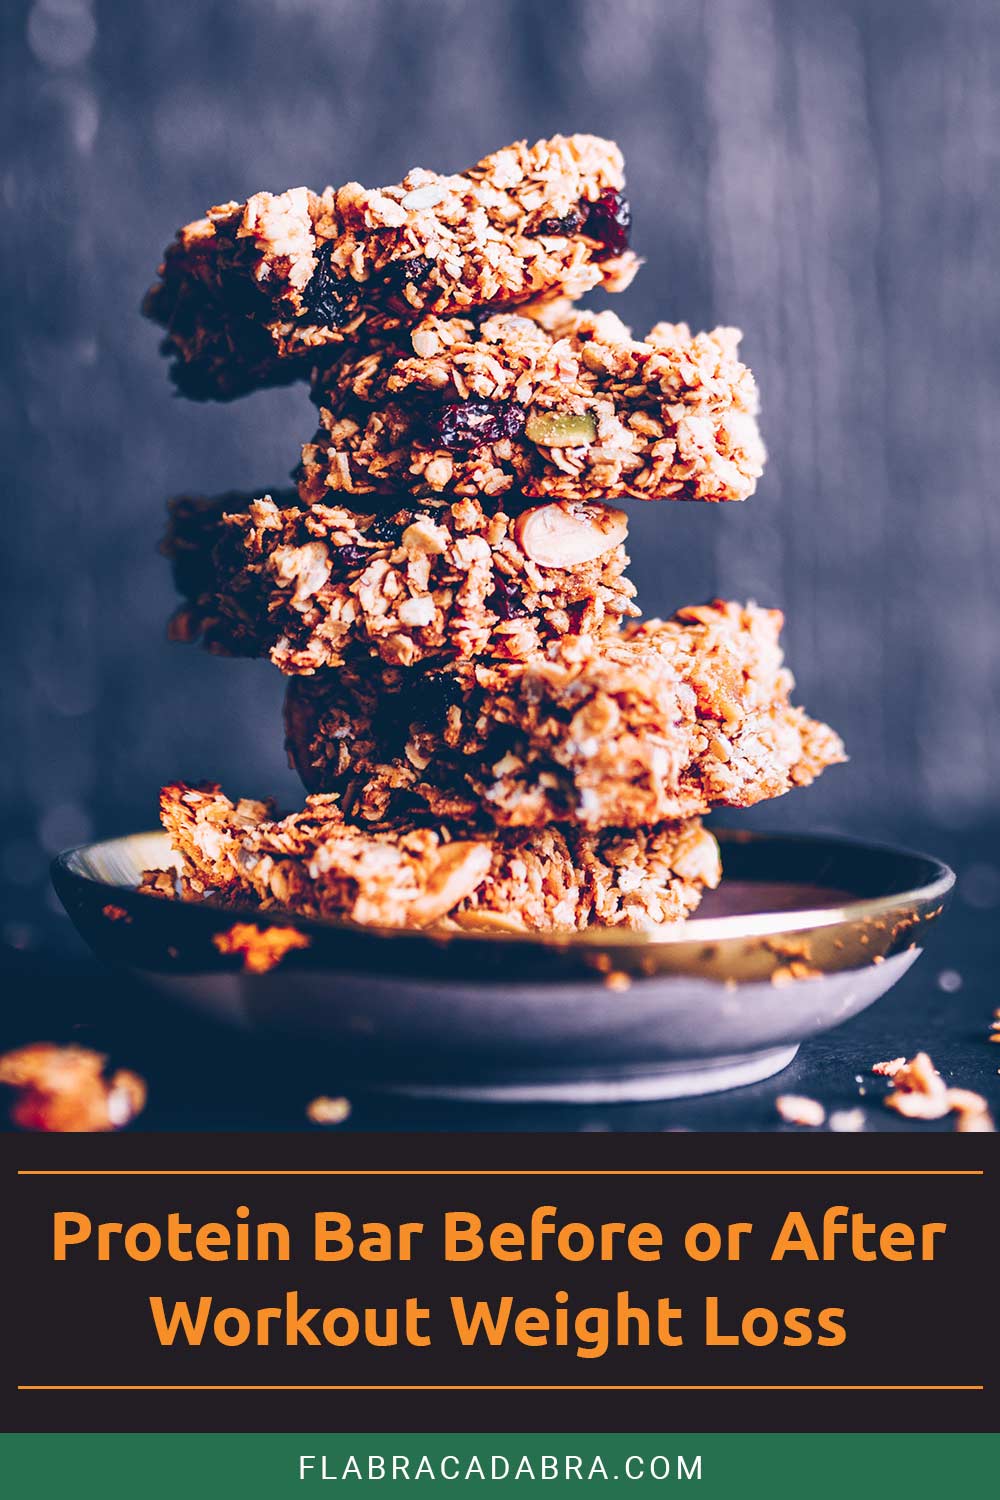 Protein bars stacked on a bowl - Protein Bar Before or After Workout Weight Loss.